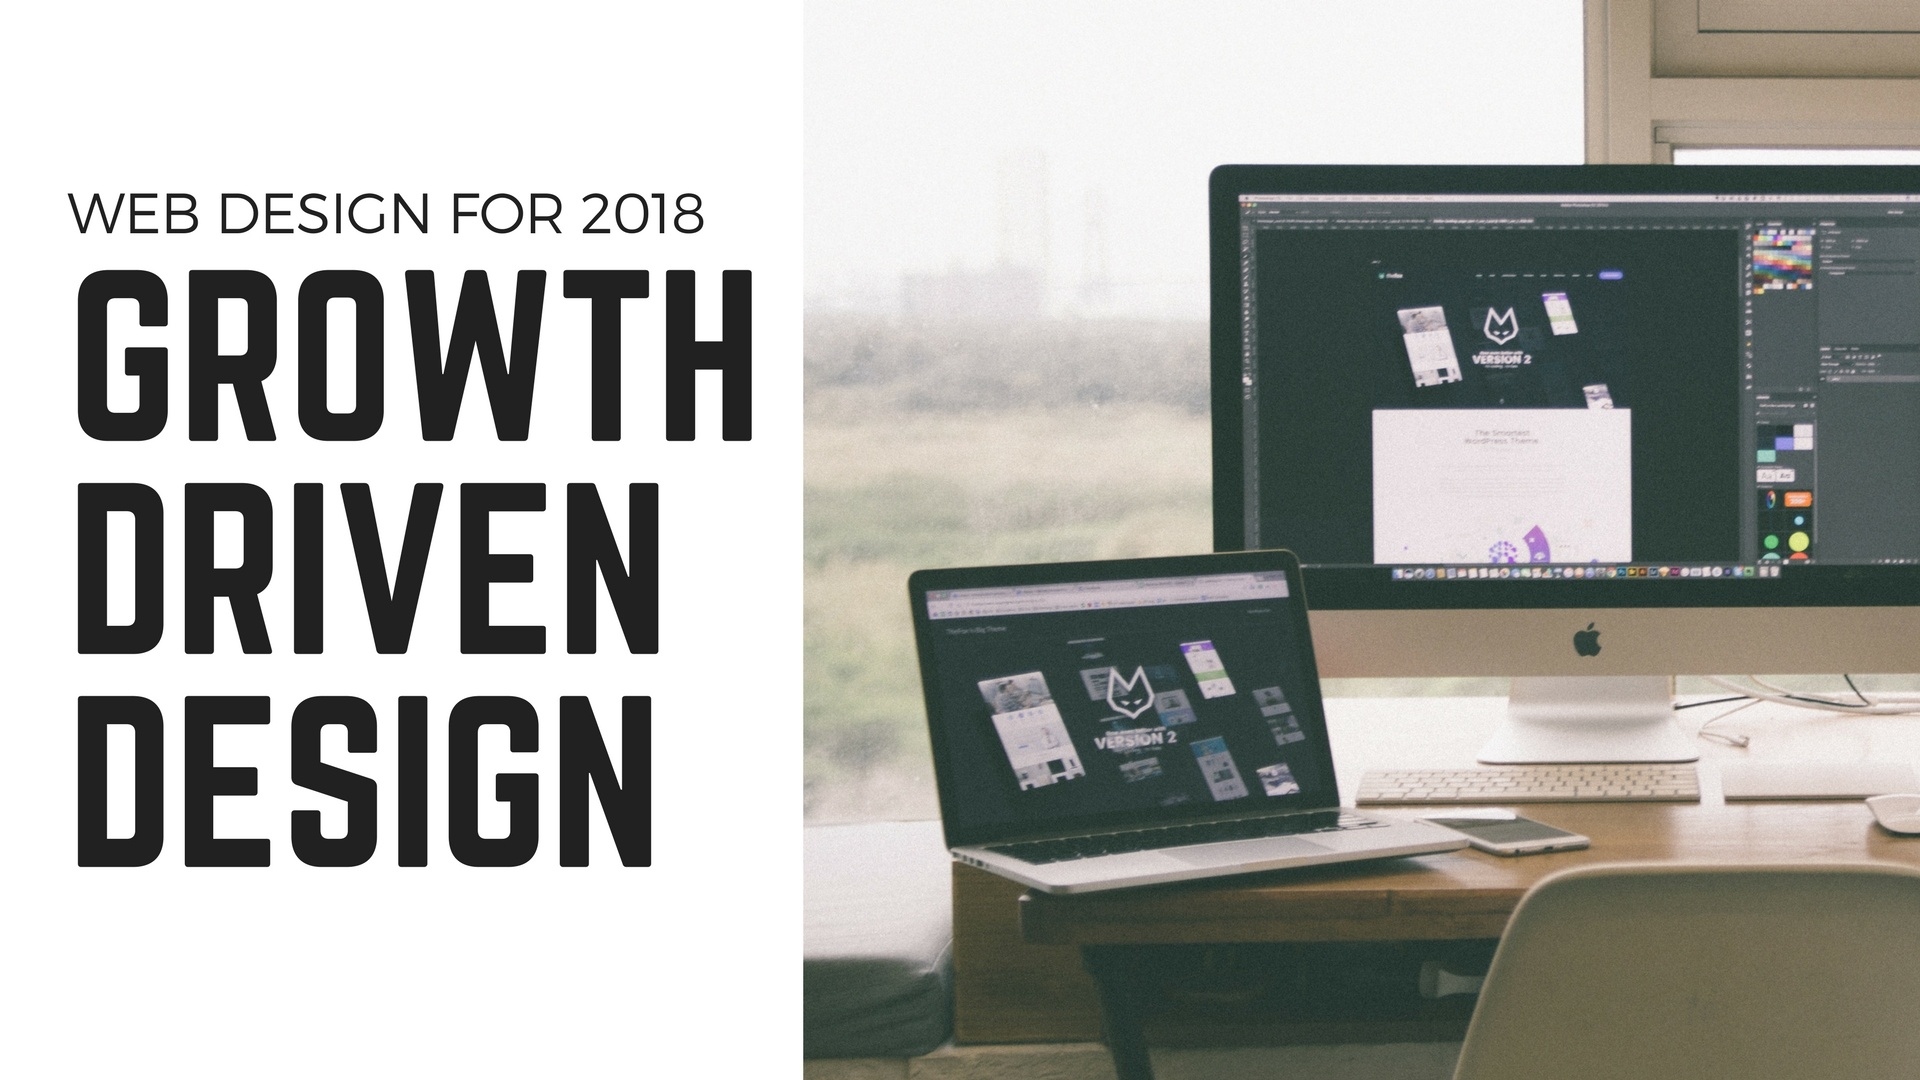 Web Design for 2018: Growth Driven Design